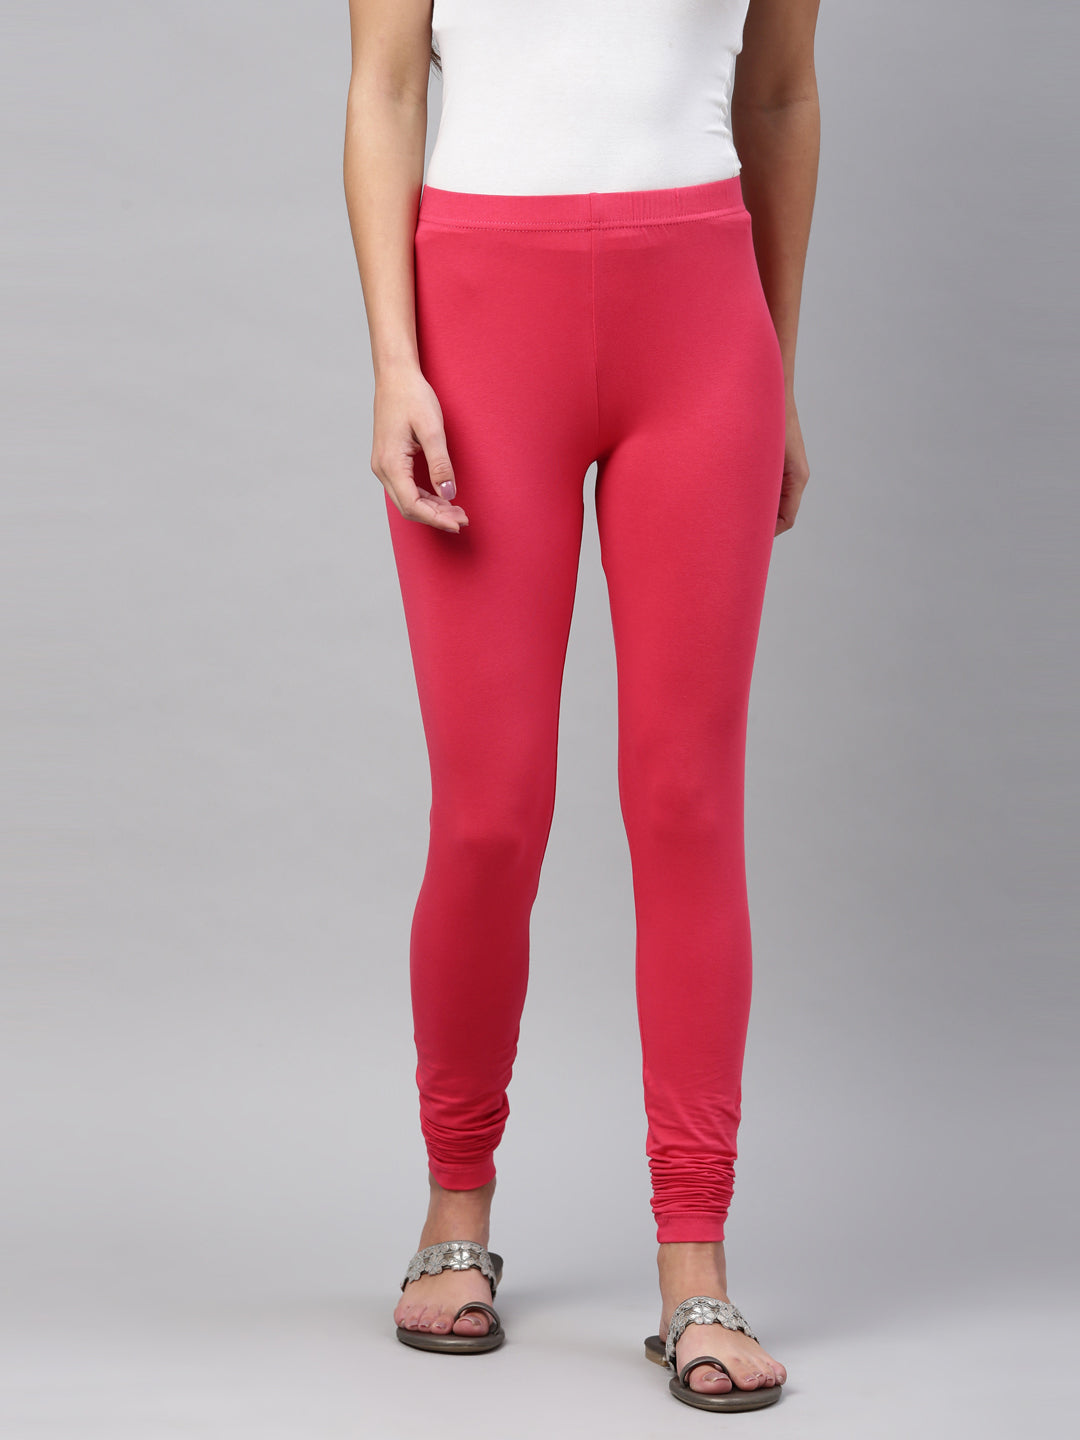 Go Colors Women Firozee Cotton Churidar Leggings (Firozee, Size S) in  Kakinada at best price by New Colors - Justdial